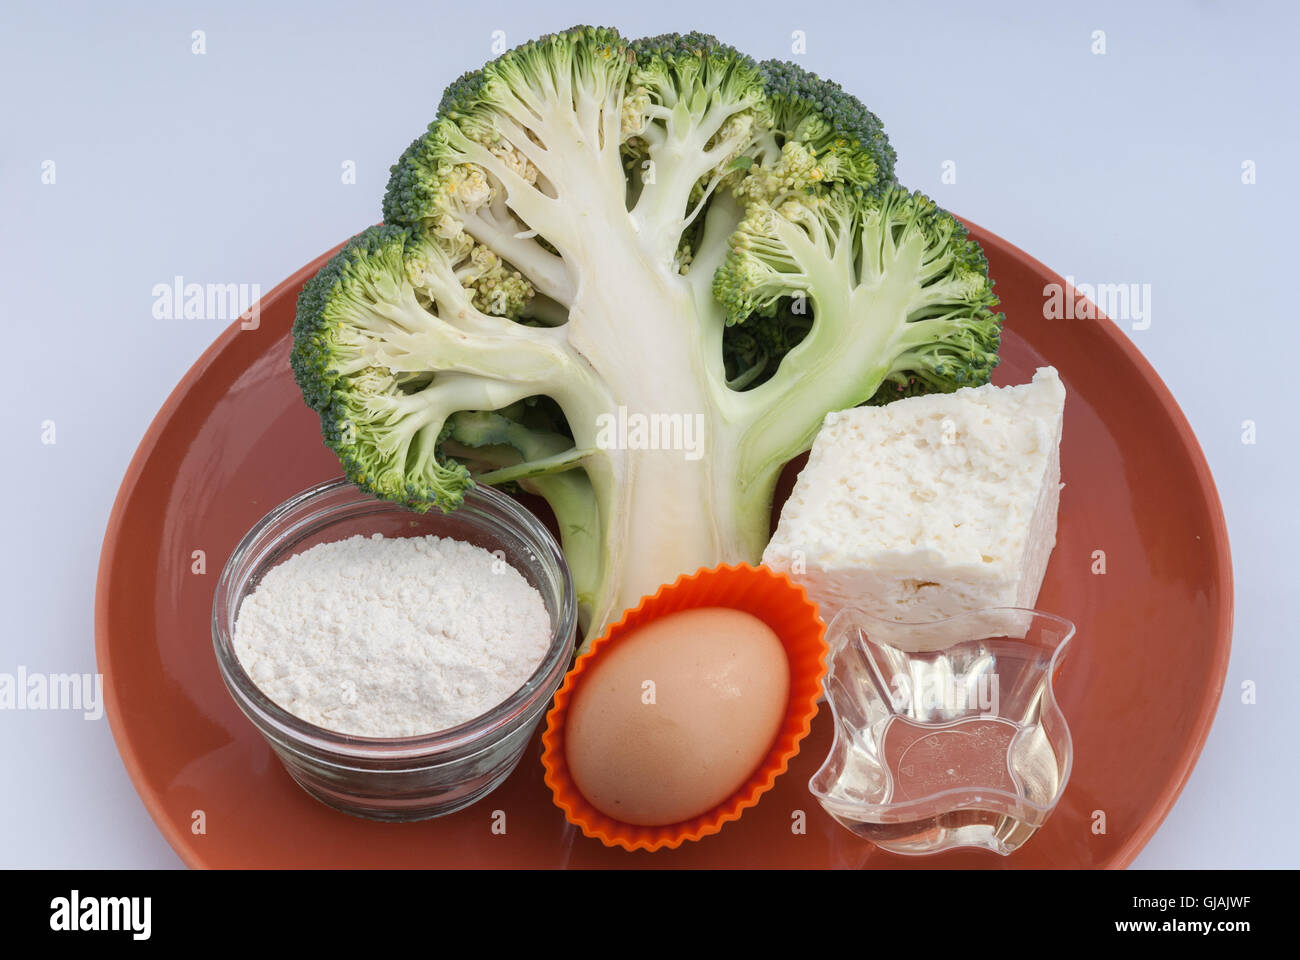 Cooking ingredients: fresh broccoli, brinza cheese, egg, sunflower oil and flour on a brown plate ready for cooking closeup. Stock Photo